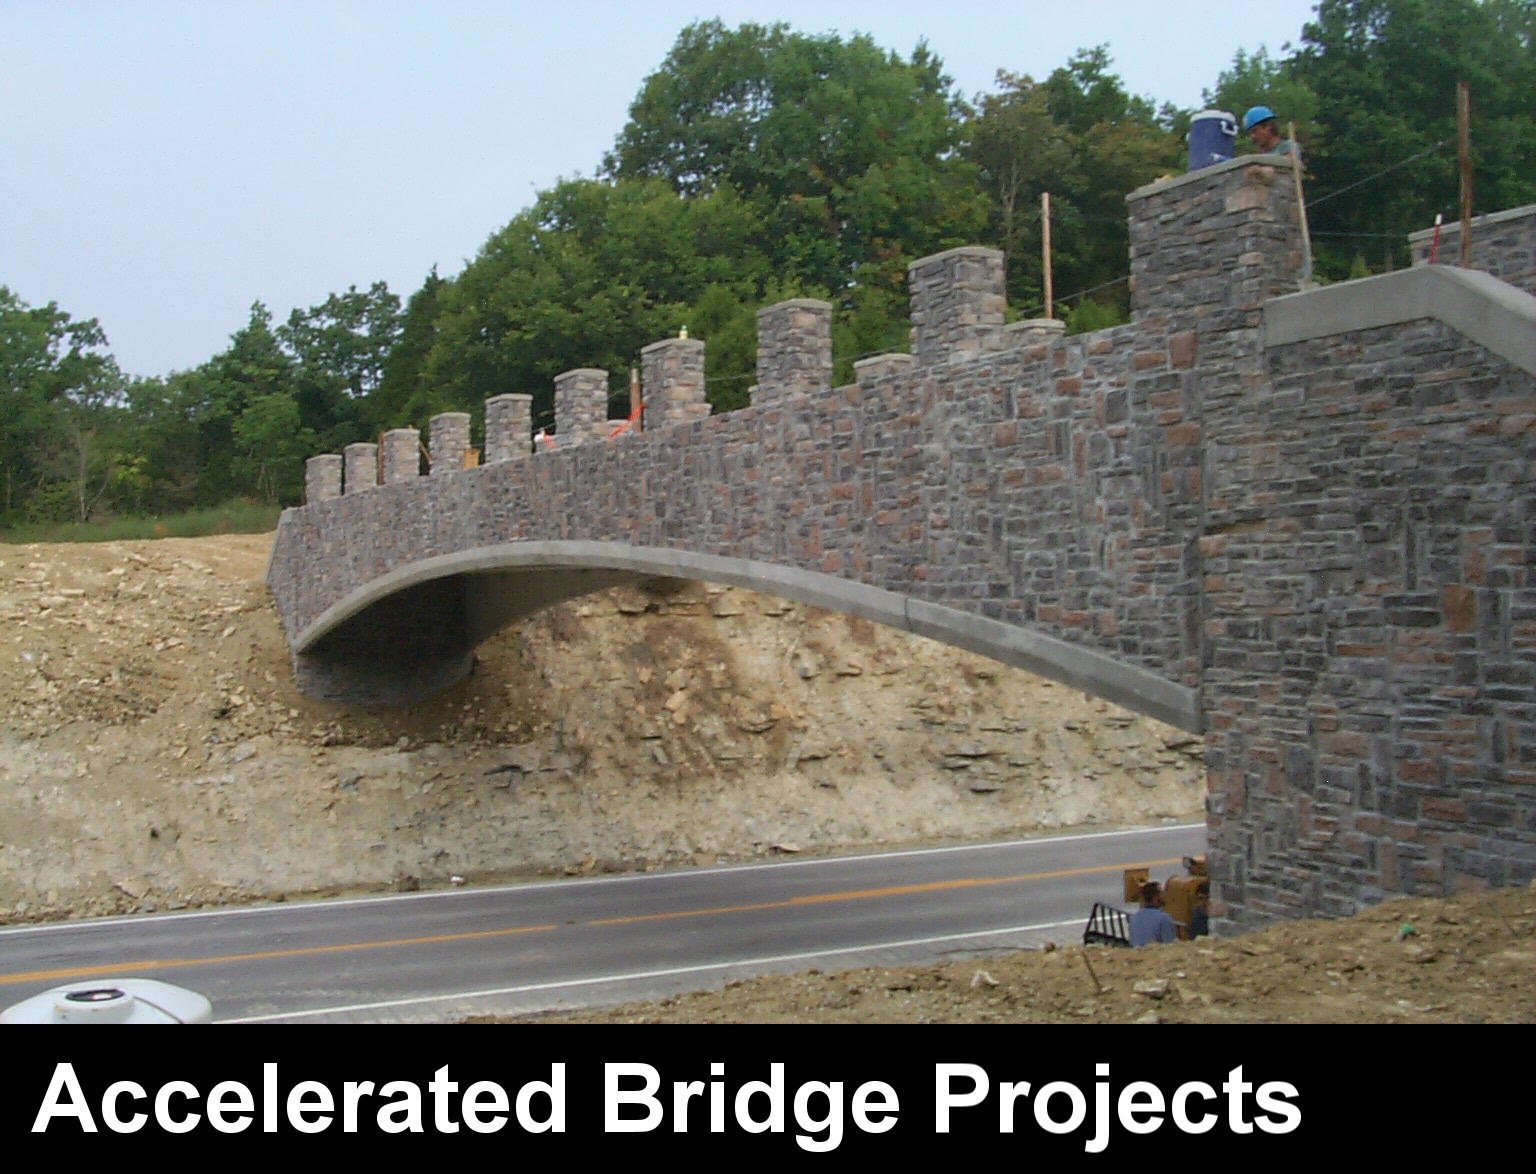 Link to the Accelerated Bridge Projects page